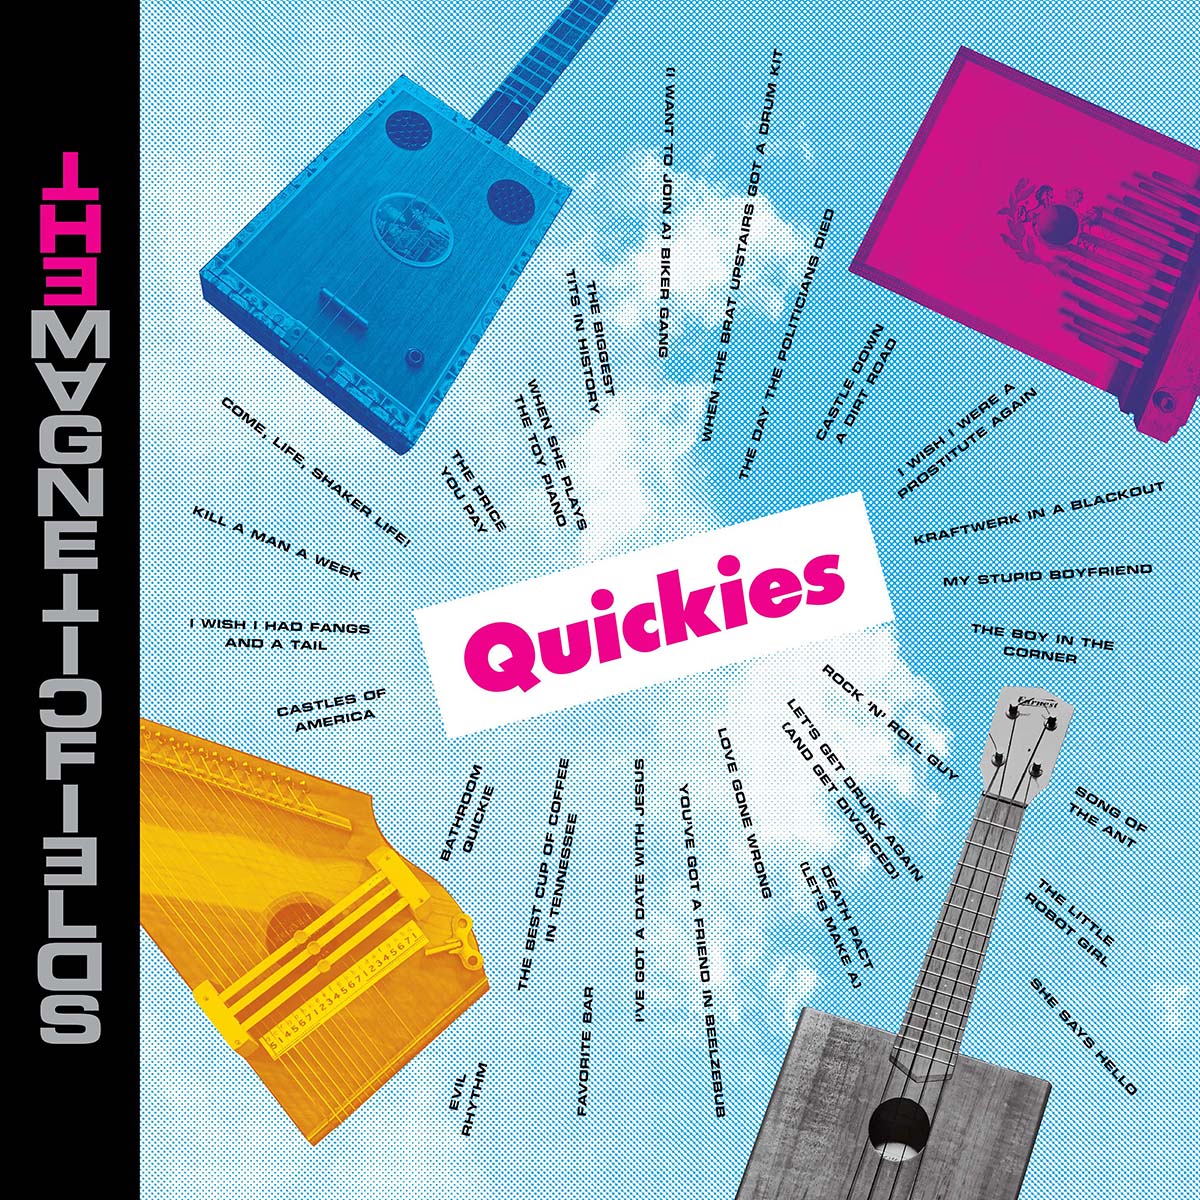 Magnetic Fields Quickies